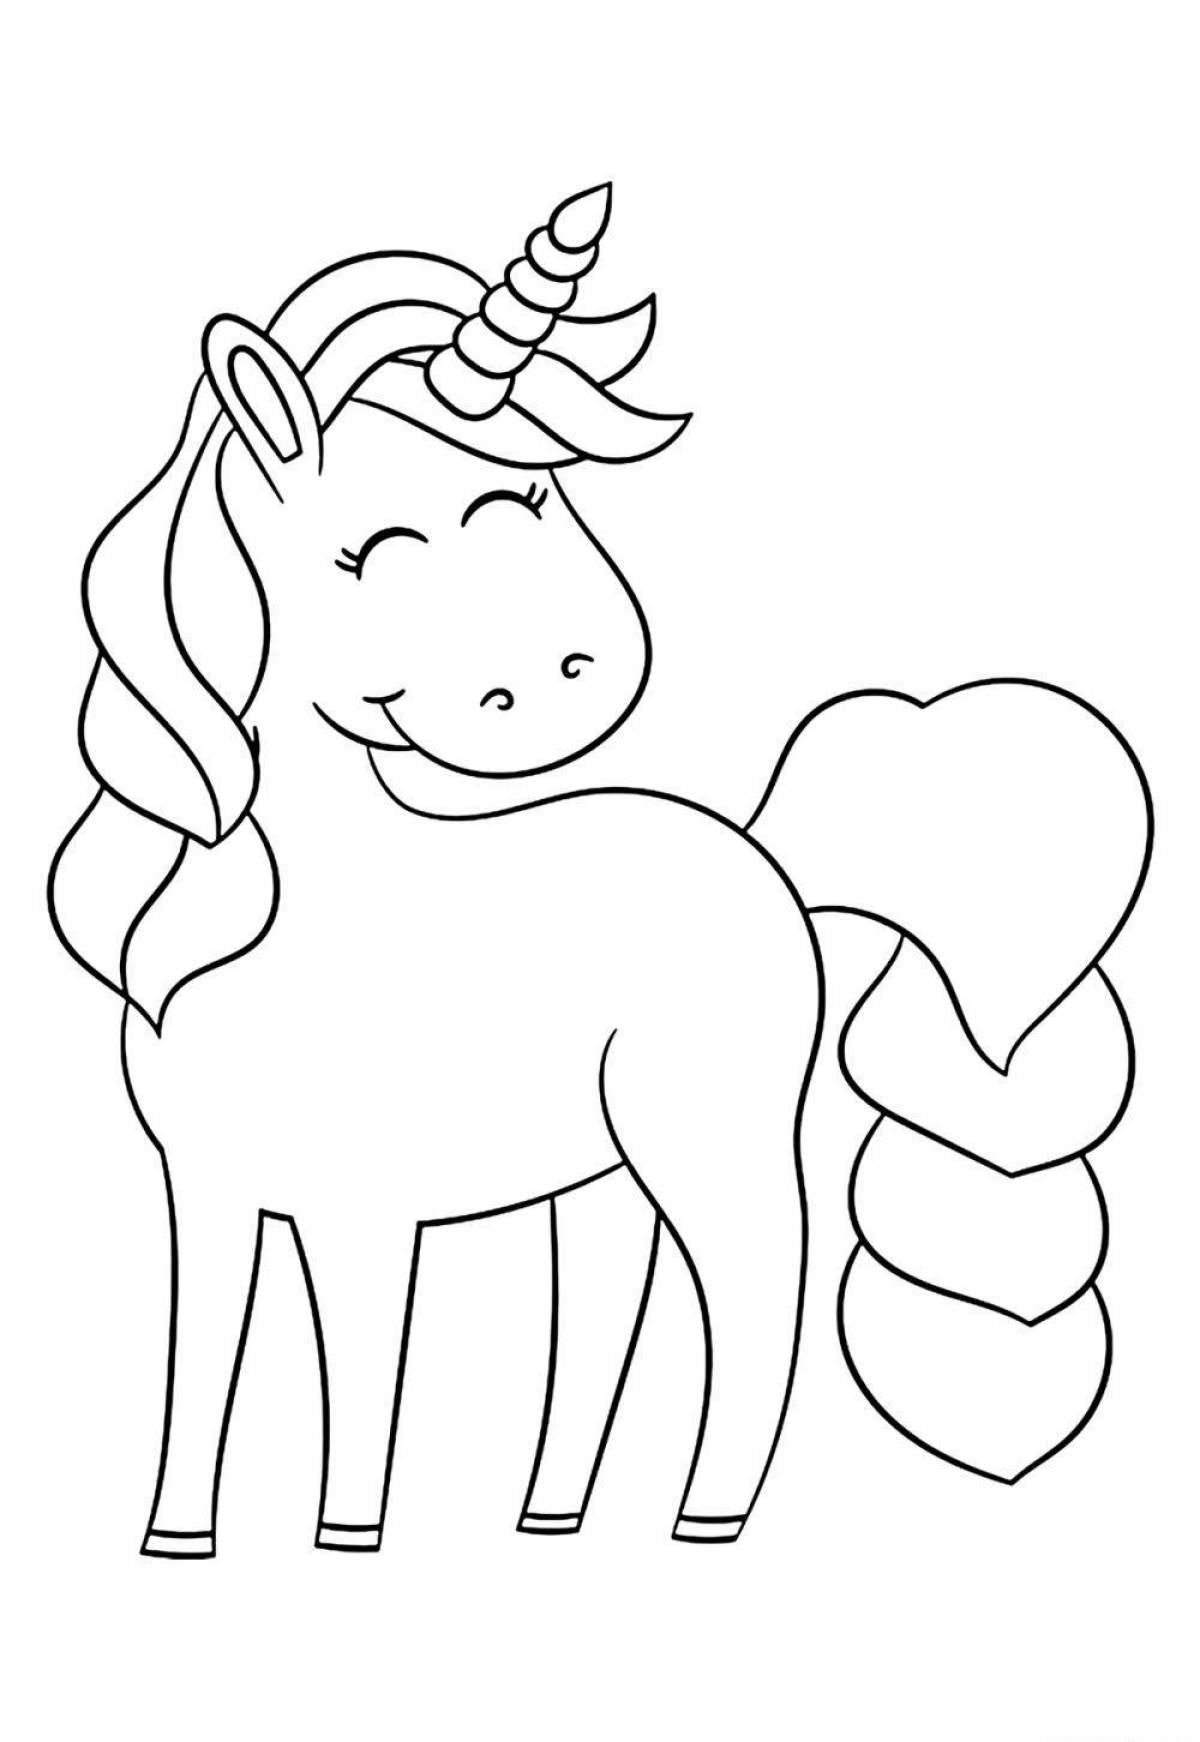 Silly coloring unicorn cute